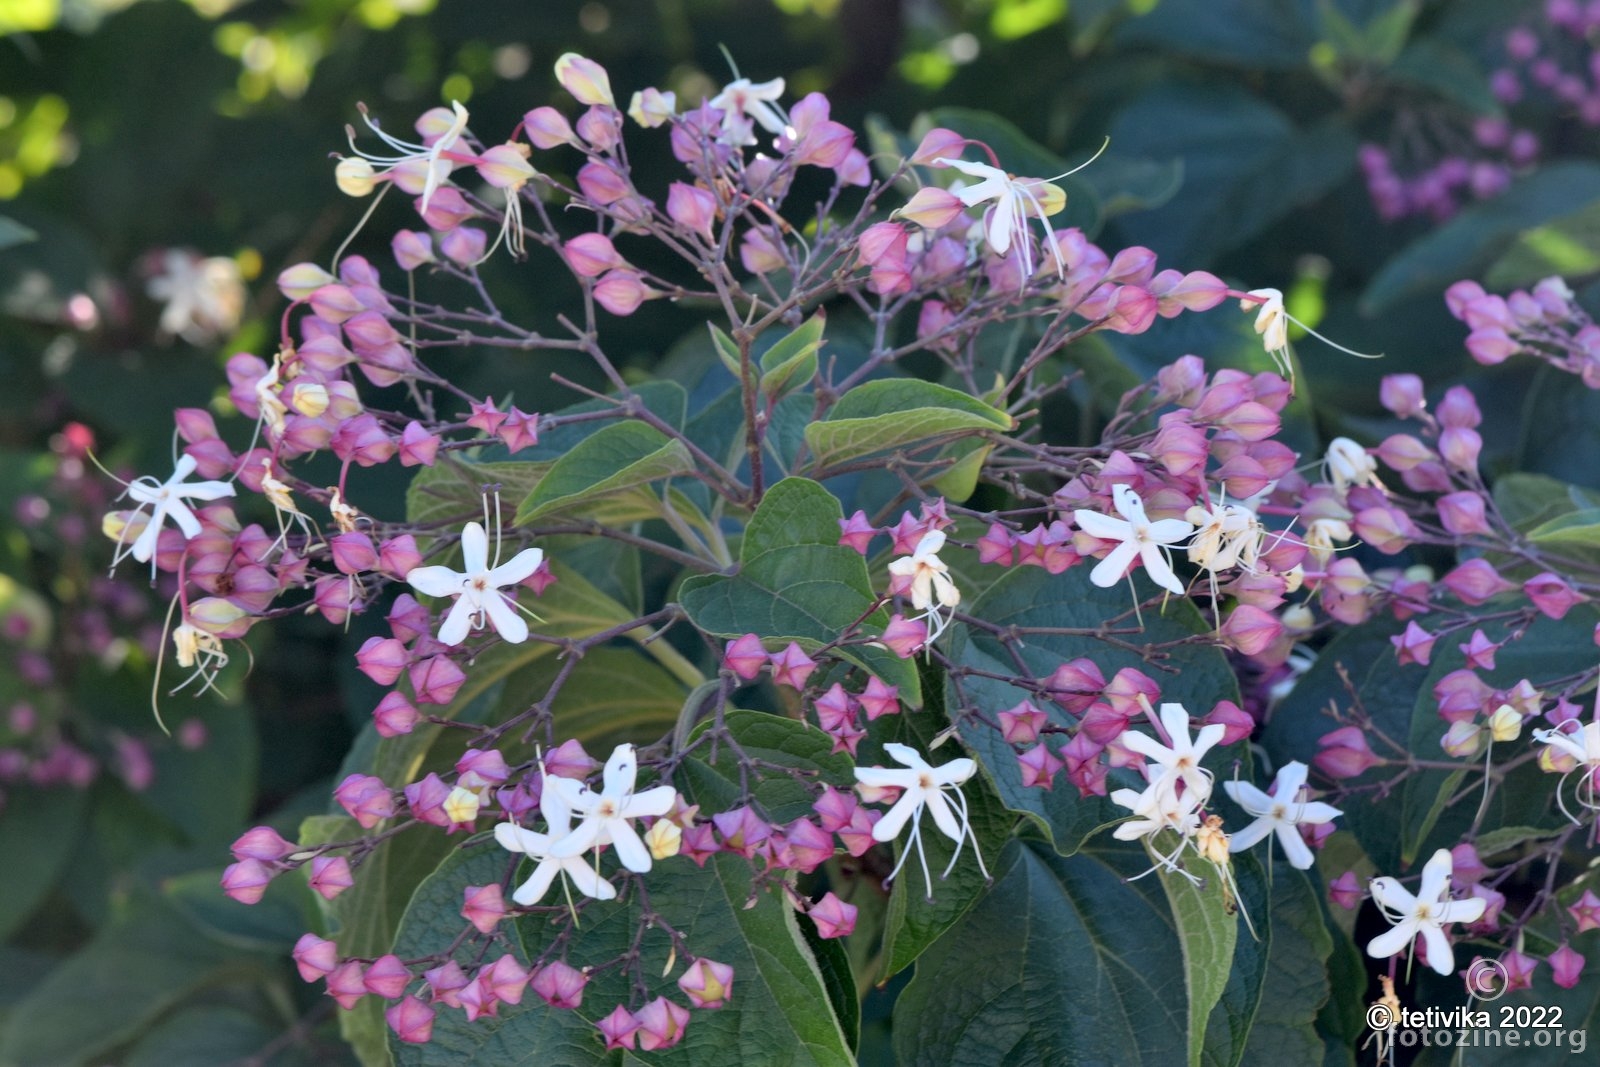 Klerodendron, Clerodendron trichotomum